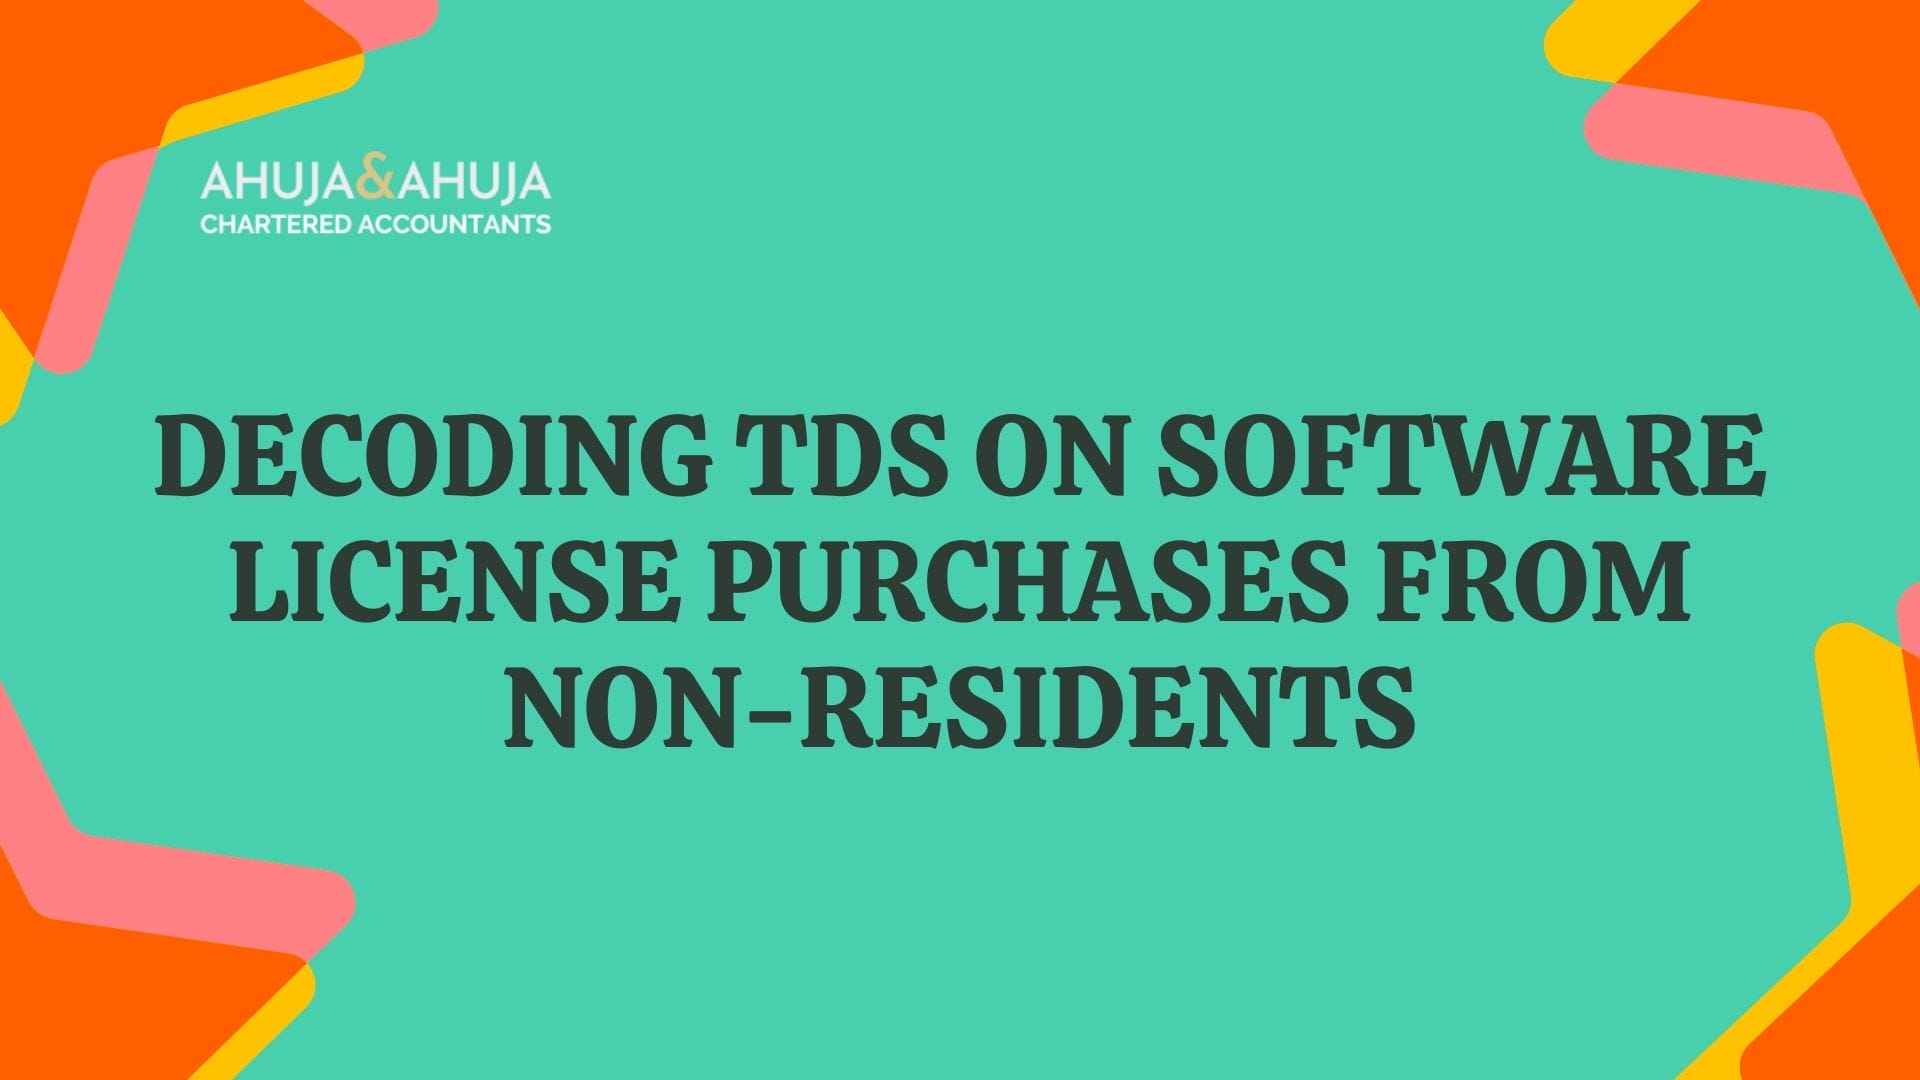 TDS on Software License Purchases from Non-Residents